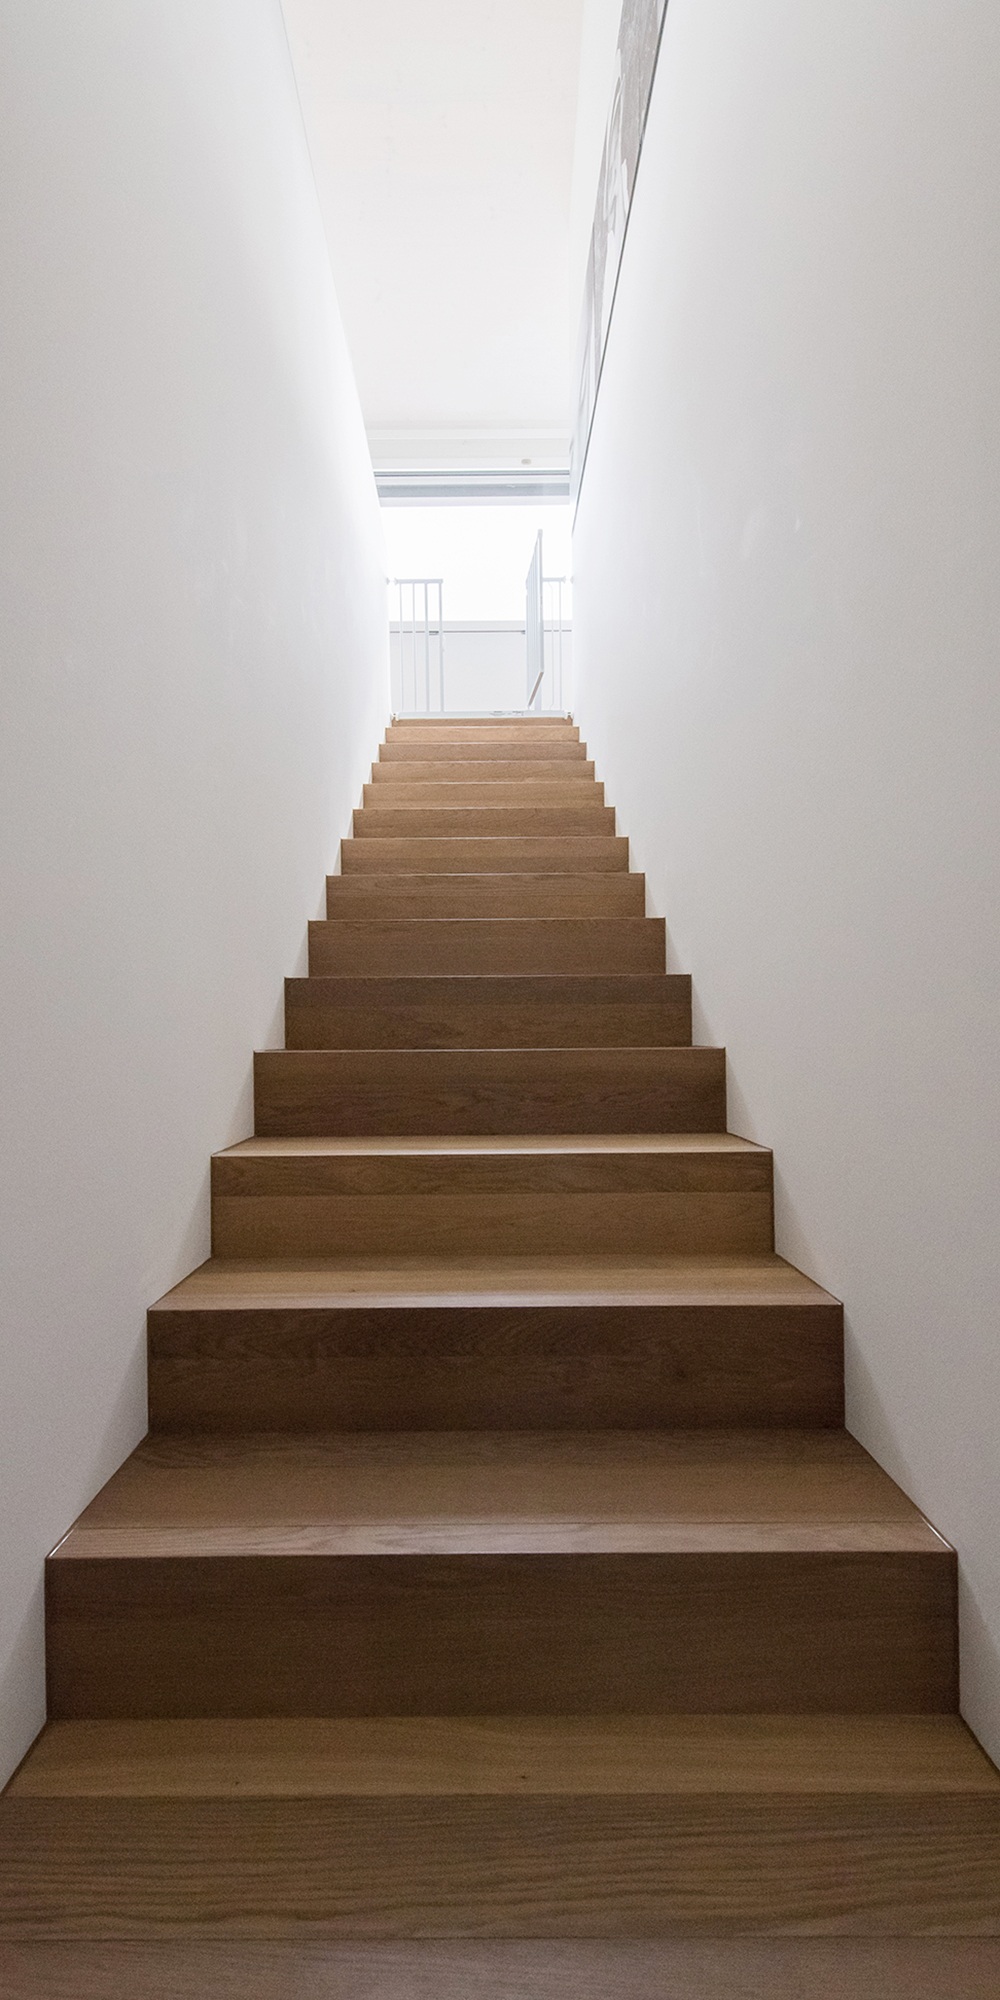 The photograph shows a long staircase in the interior of the single-family house with lake views